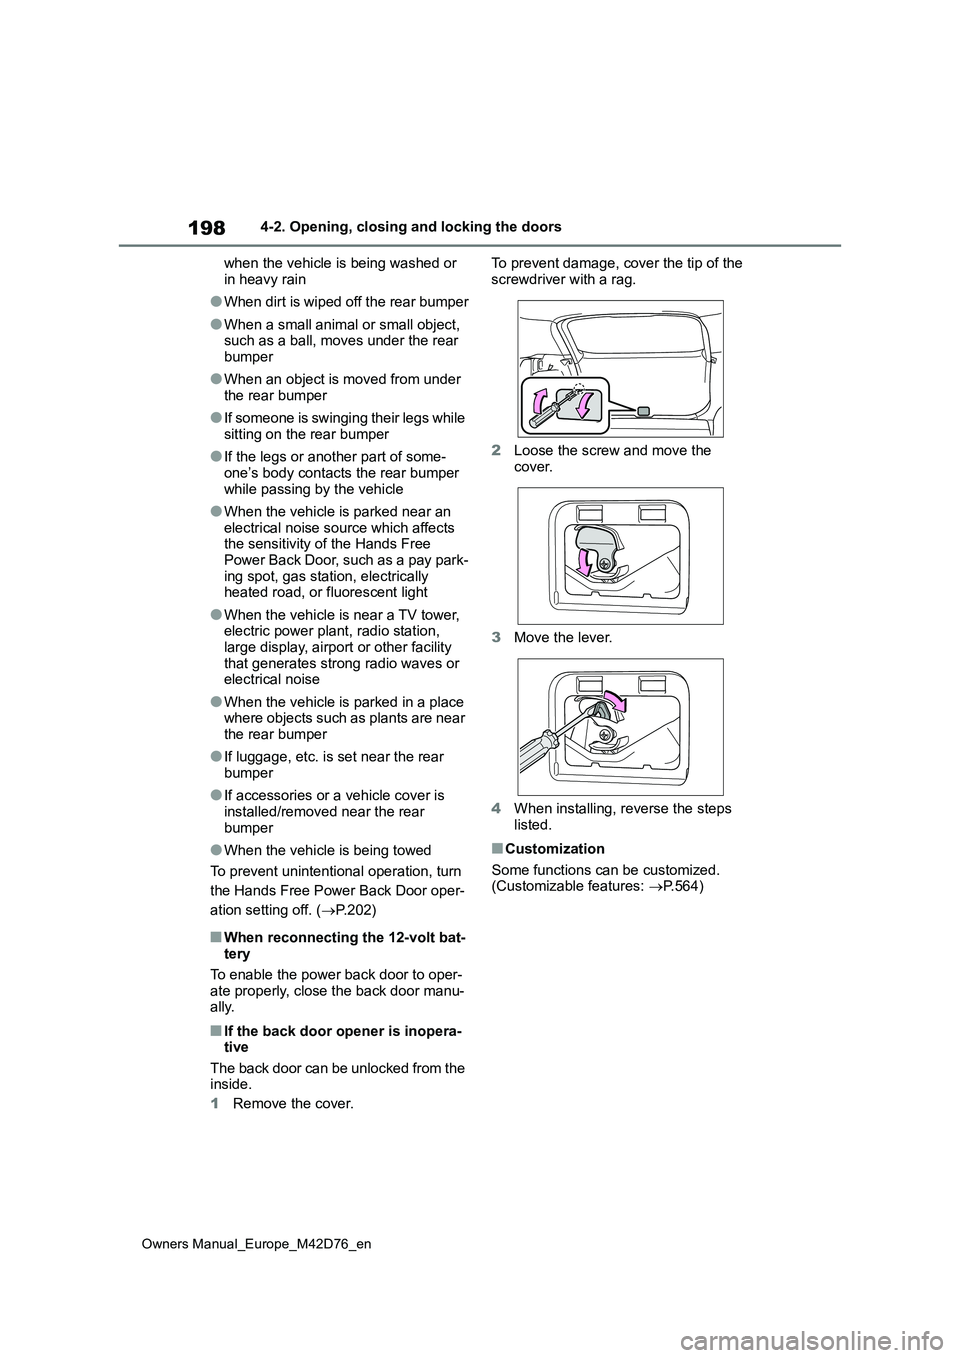 TOYOTA BZ4X 2022  Owners Manual (in English) 198
Owners Manual_Europe_M42D76_en
4-2. Opening, closing and locking the doors 
when the vehicle is being washed or  
in heavy rain
●When dirt is wiped off the rear bumper
●When a small animal or 